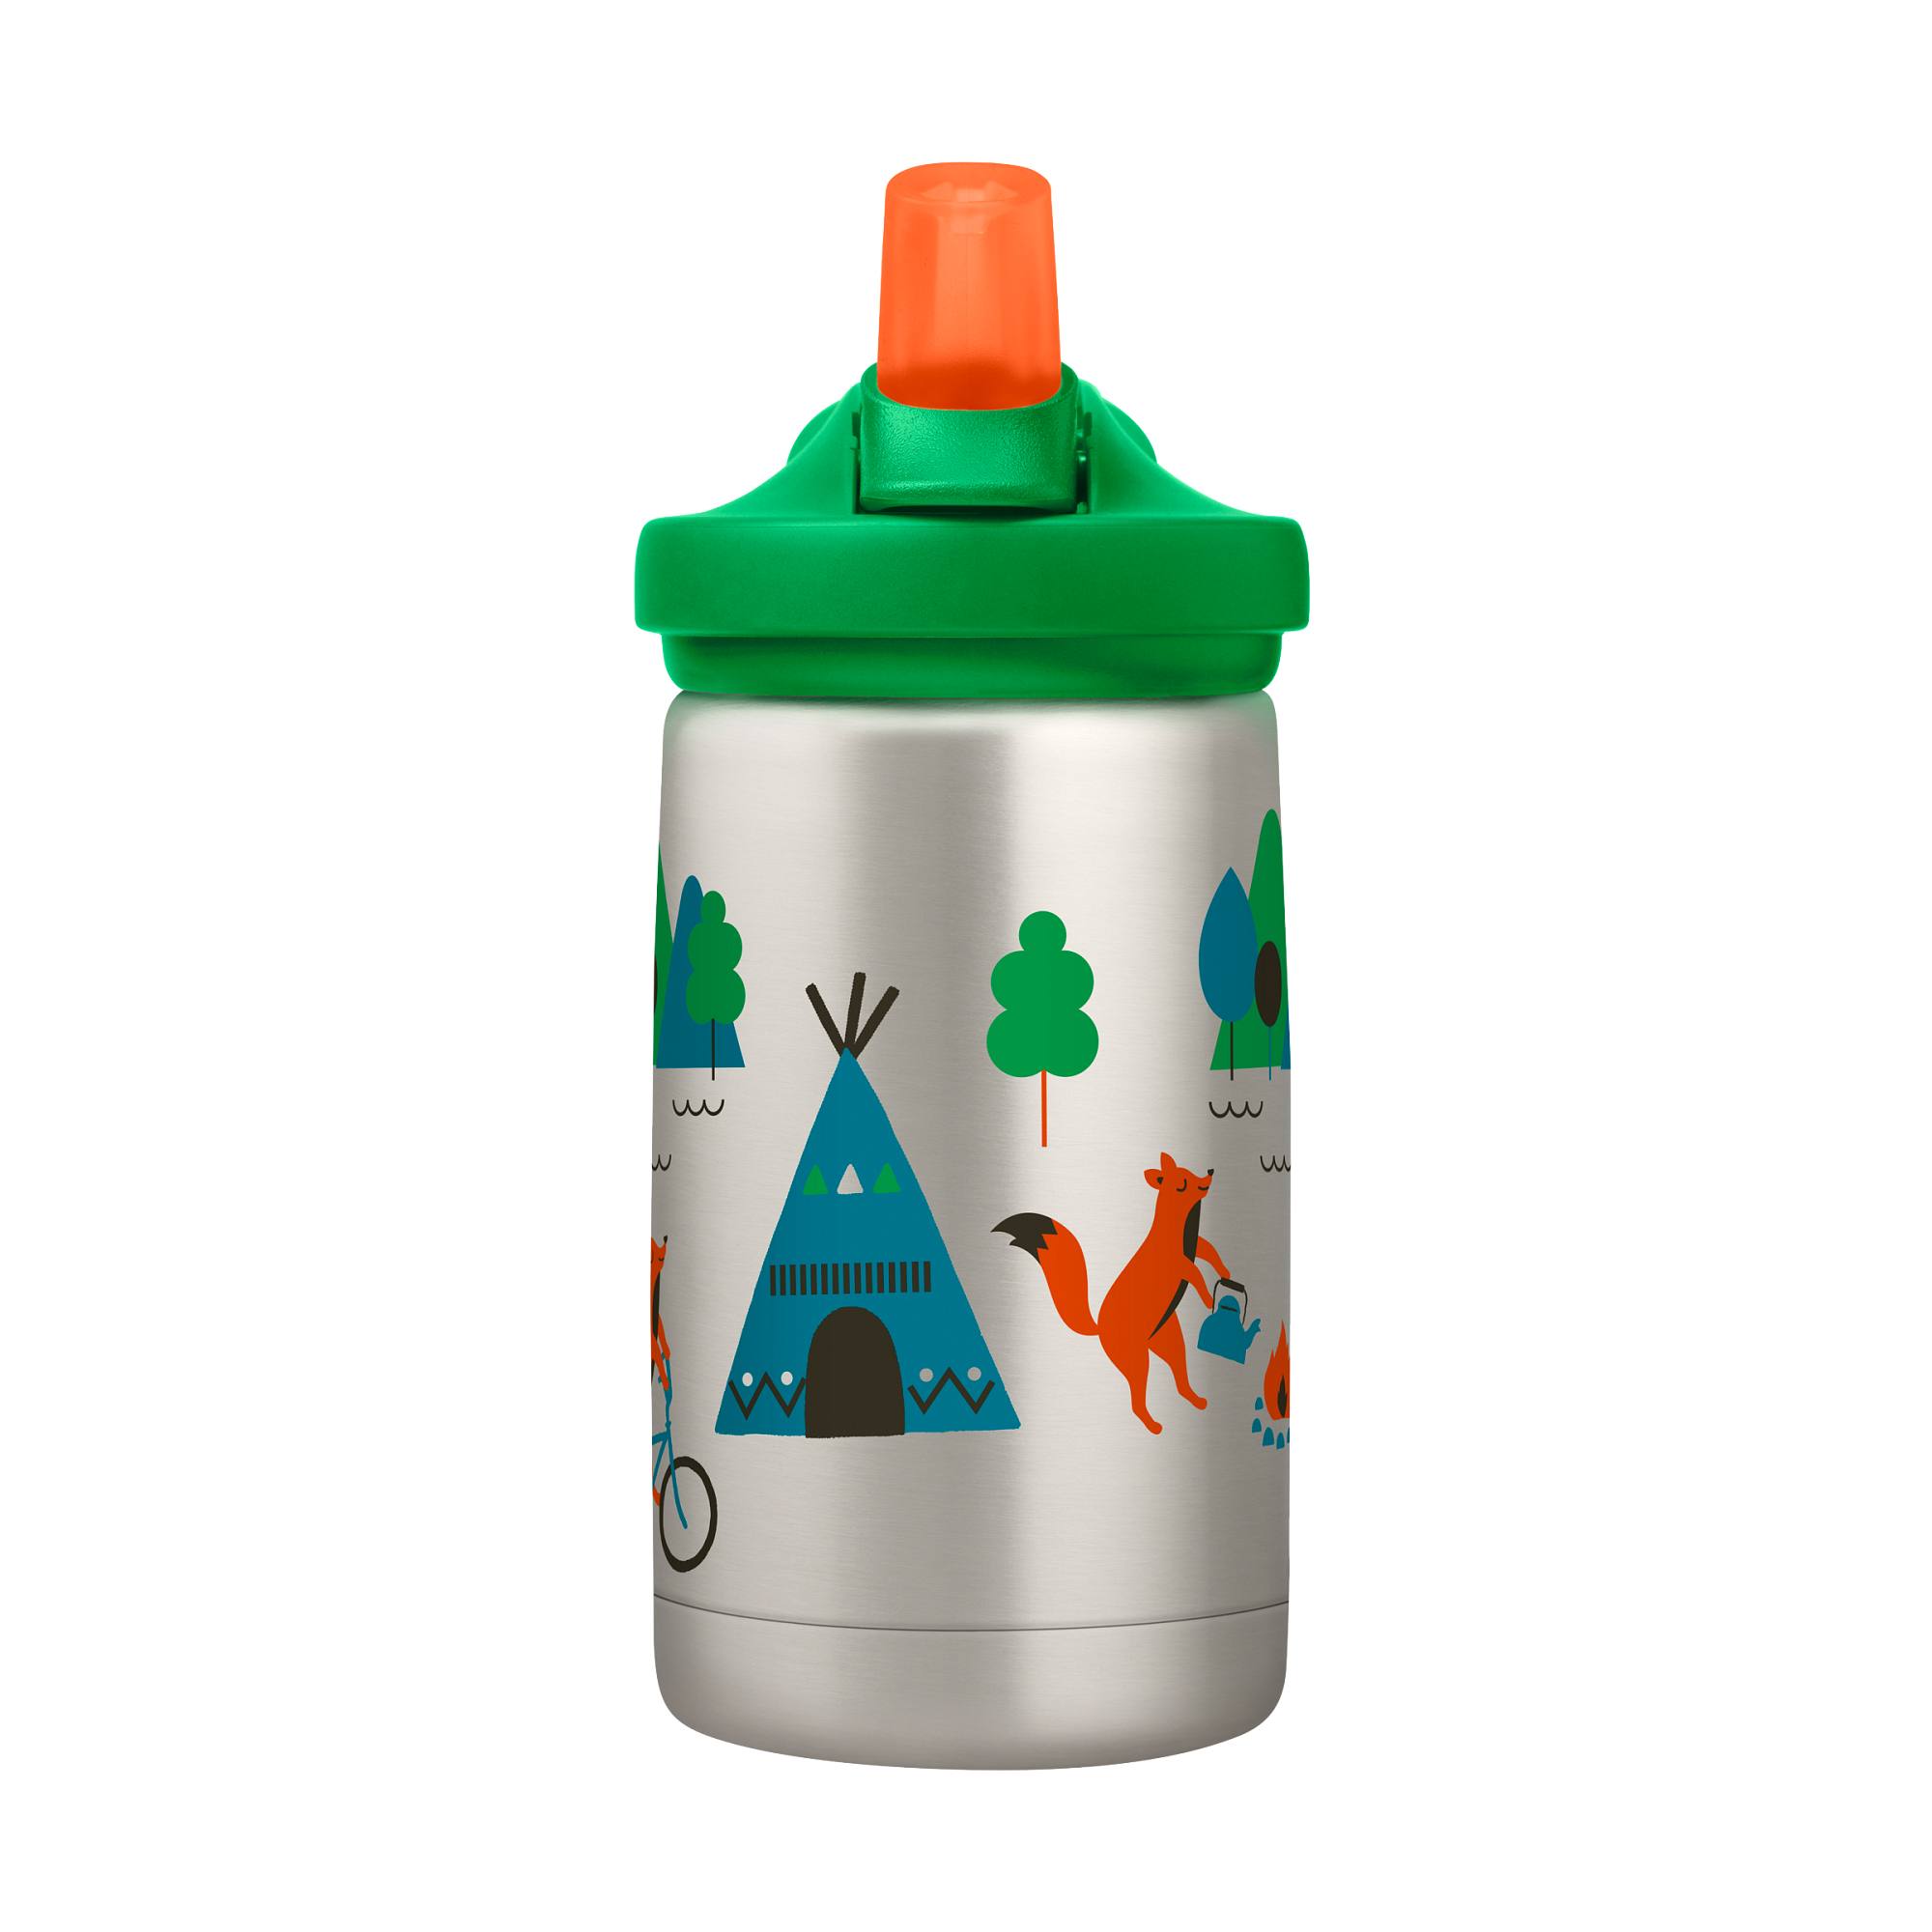 Photos - Thermos CamelBak Eddy®+ Kids 12 oz Bottle, Insulated Stainless Steel CB-2284 